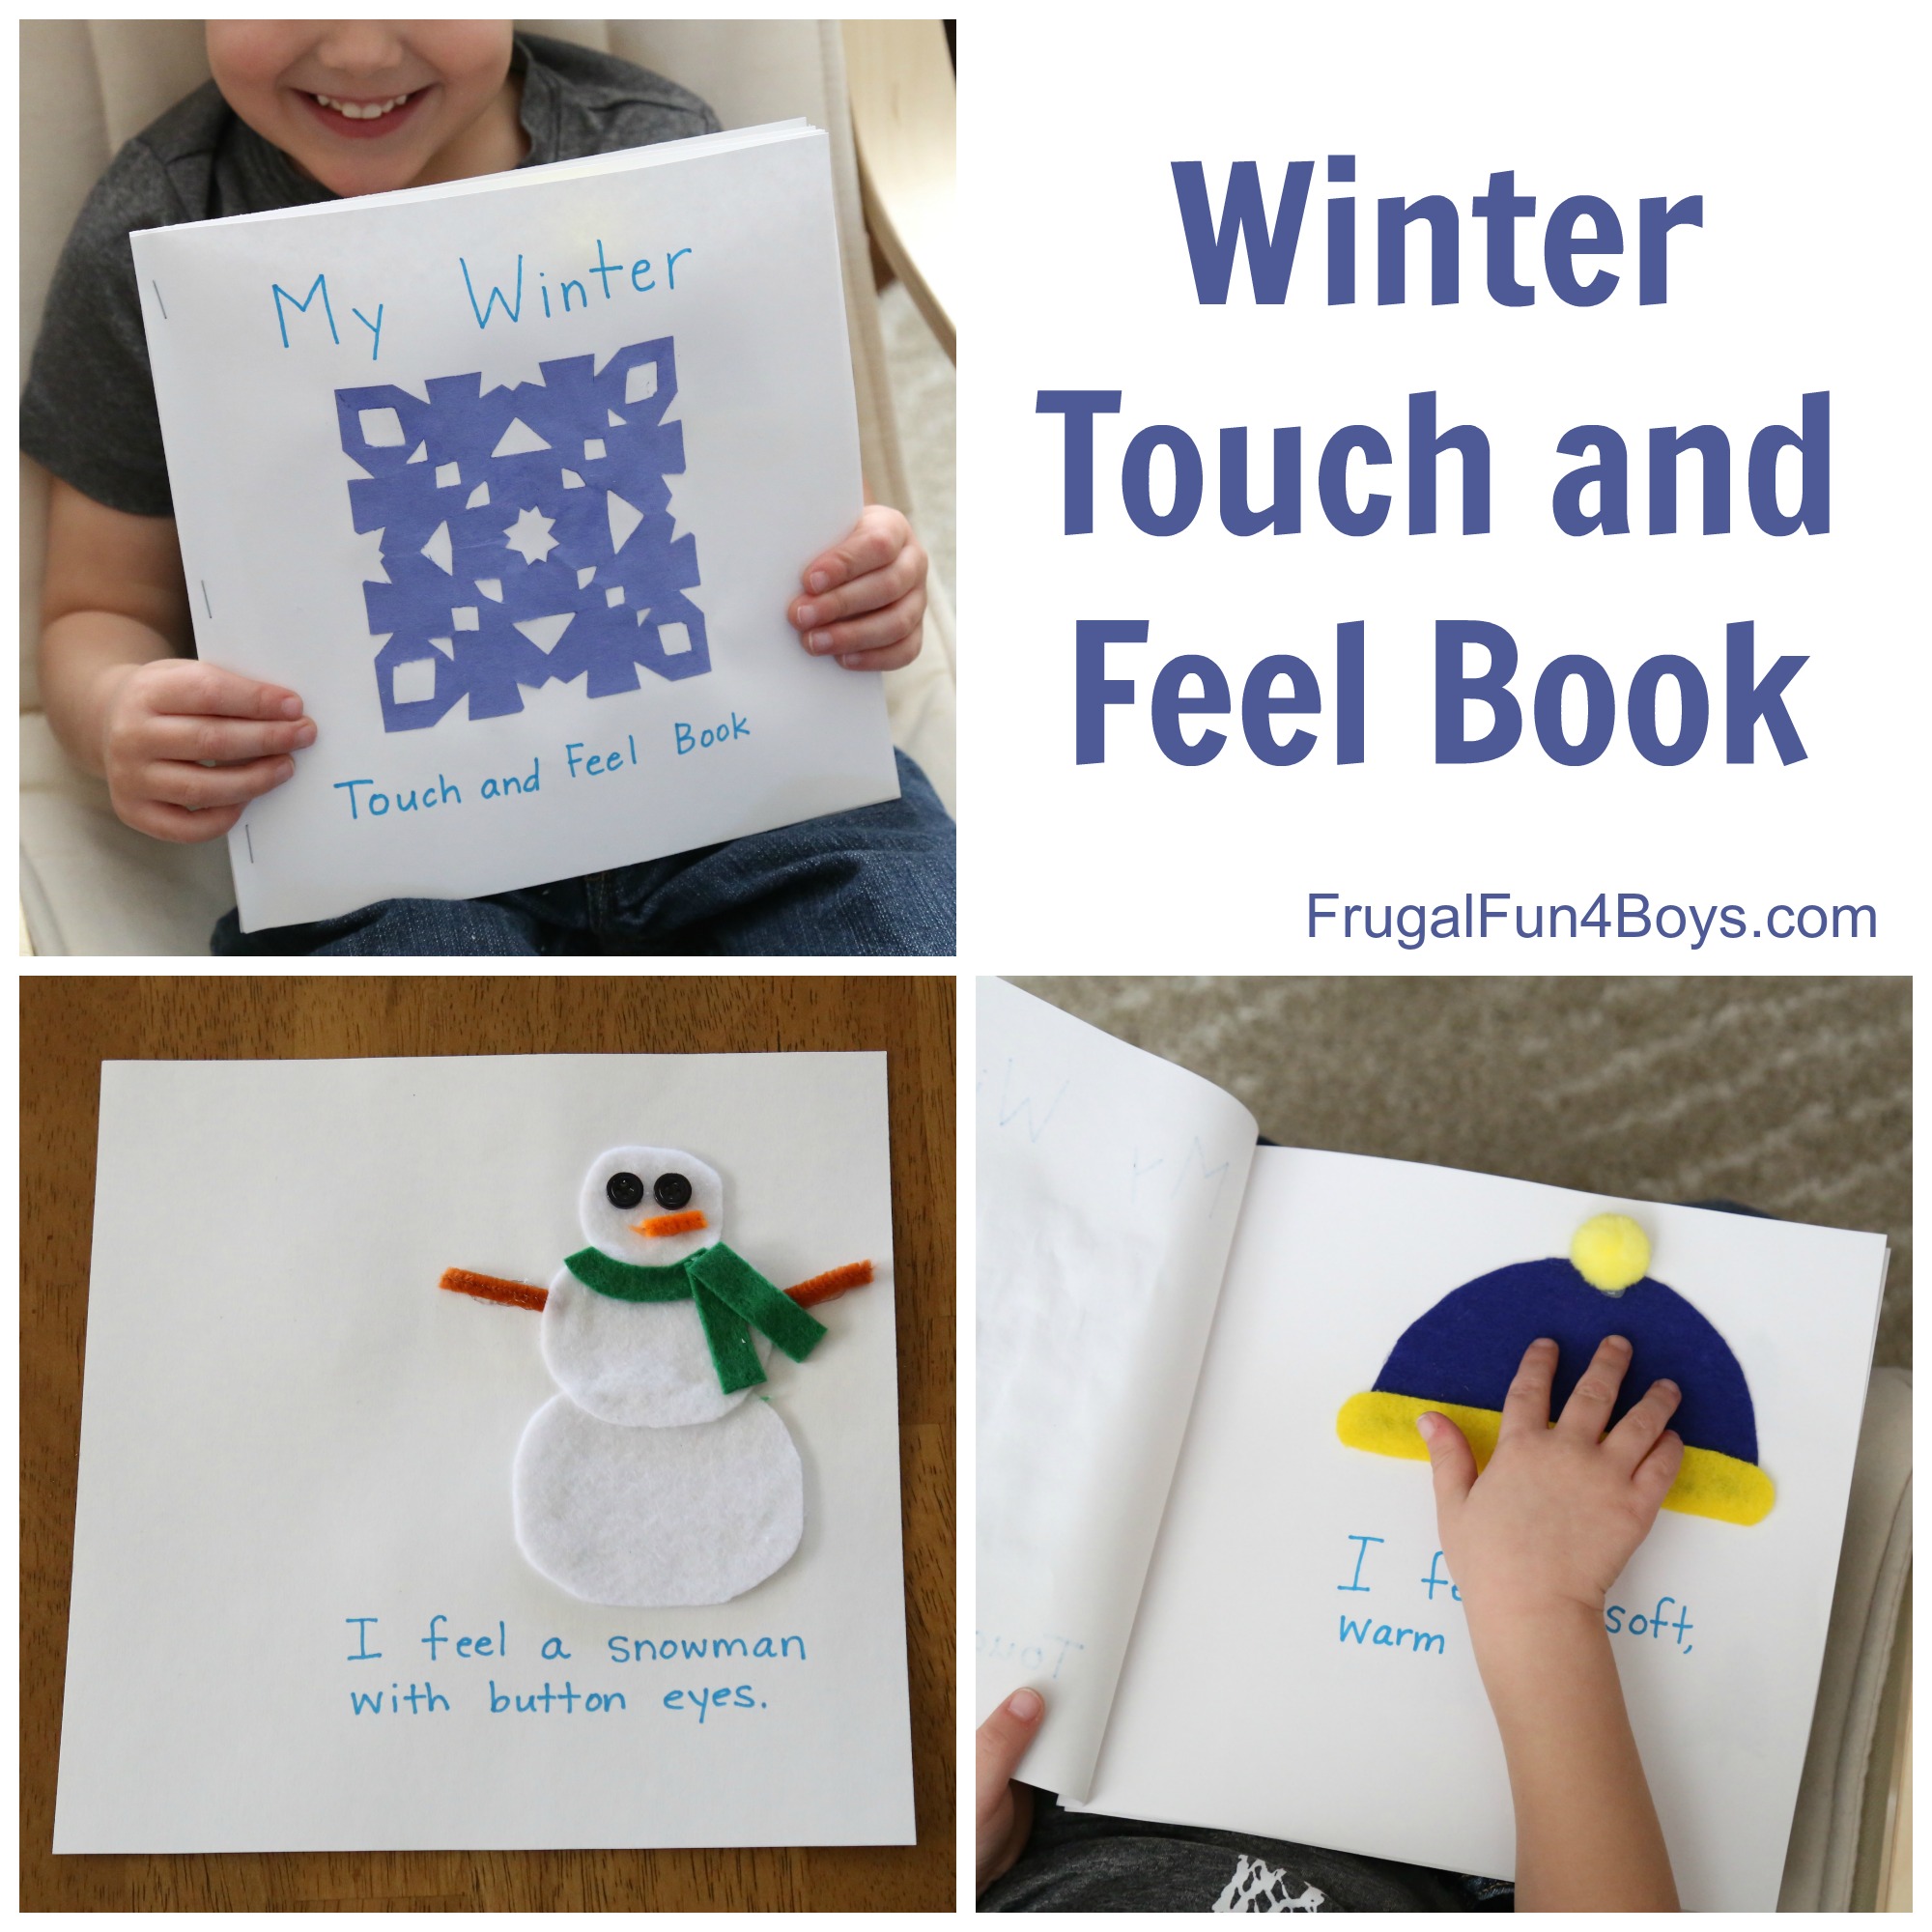 Make a Winter Touch and Feel Book that Toddlers and Preschoolers will Love!